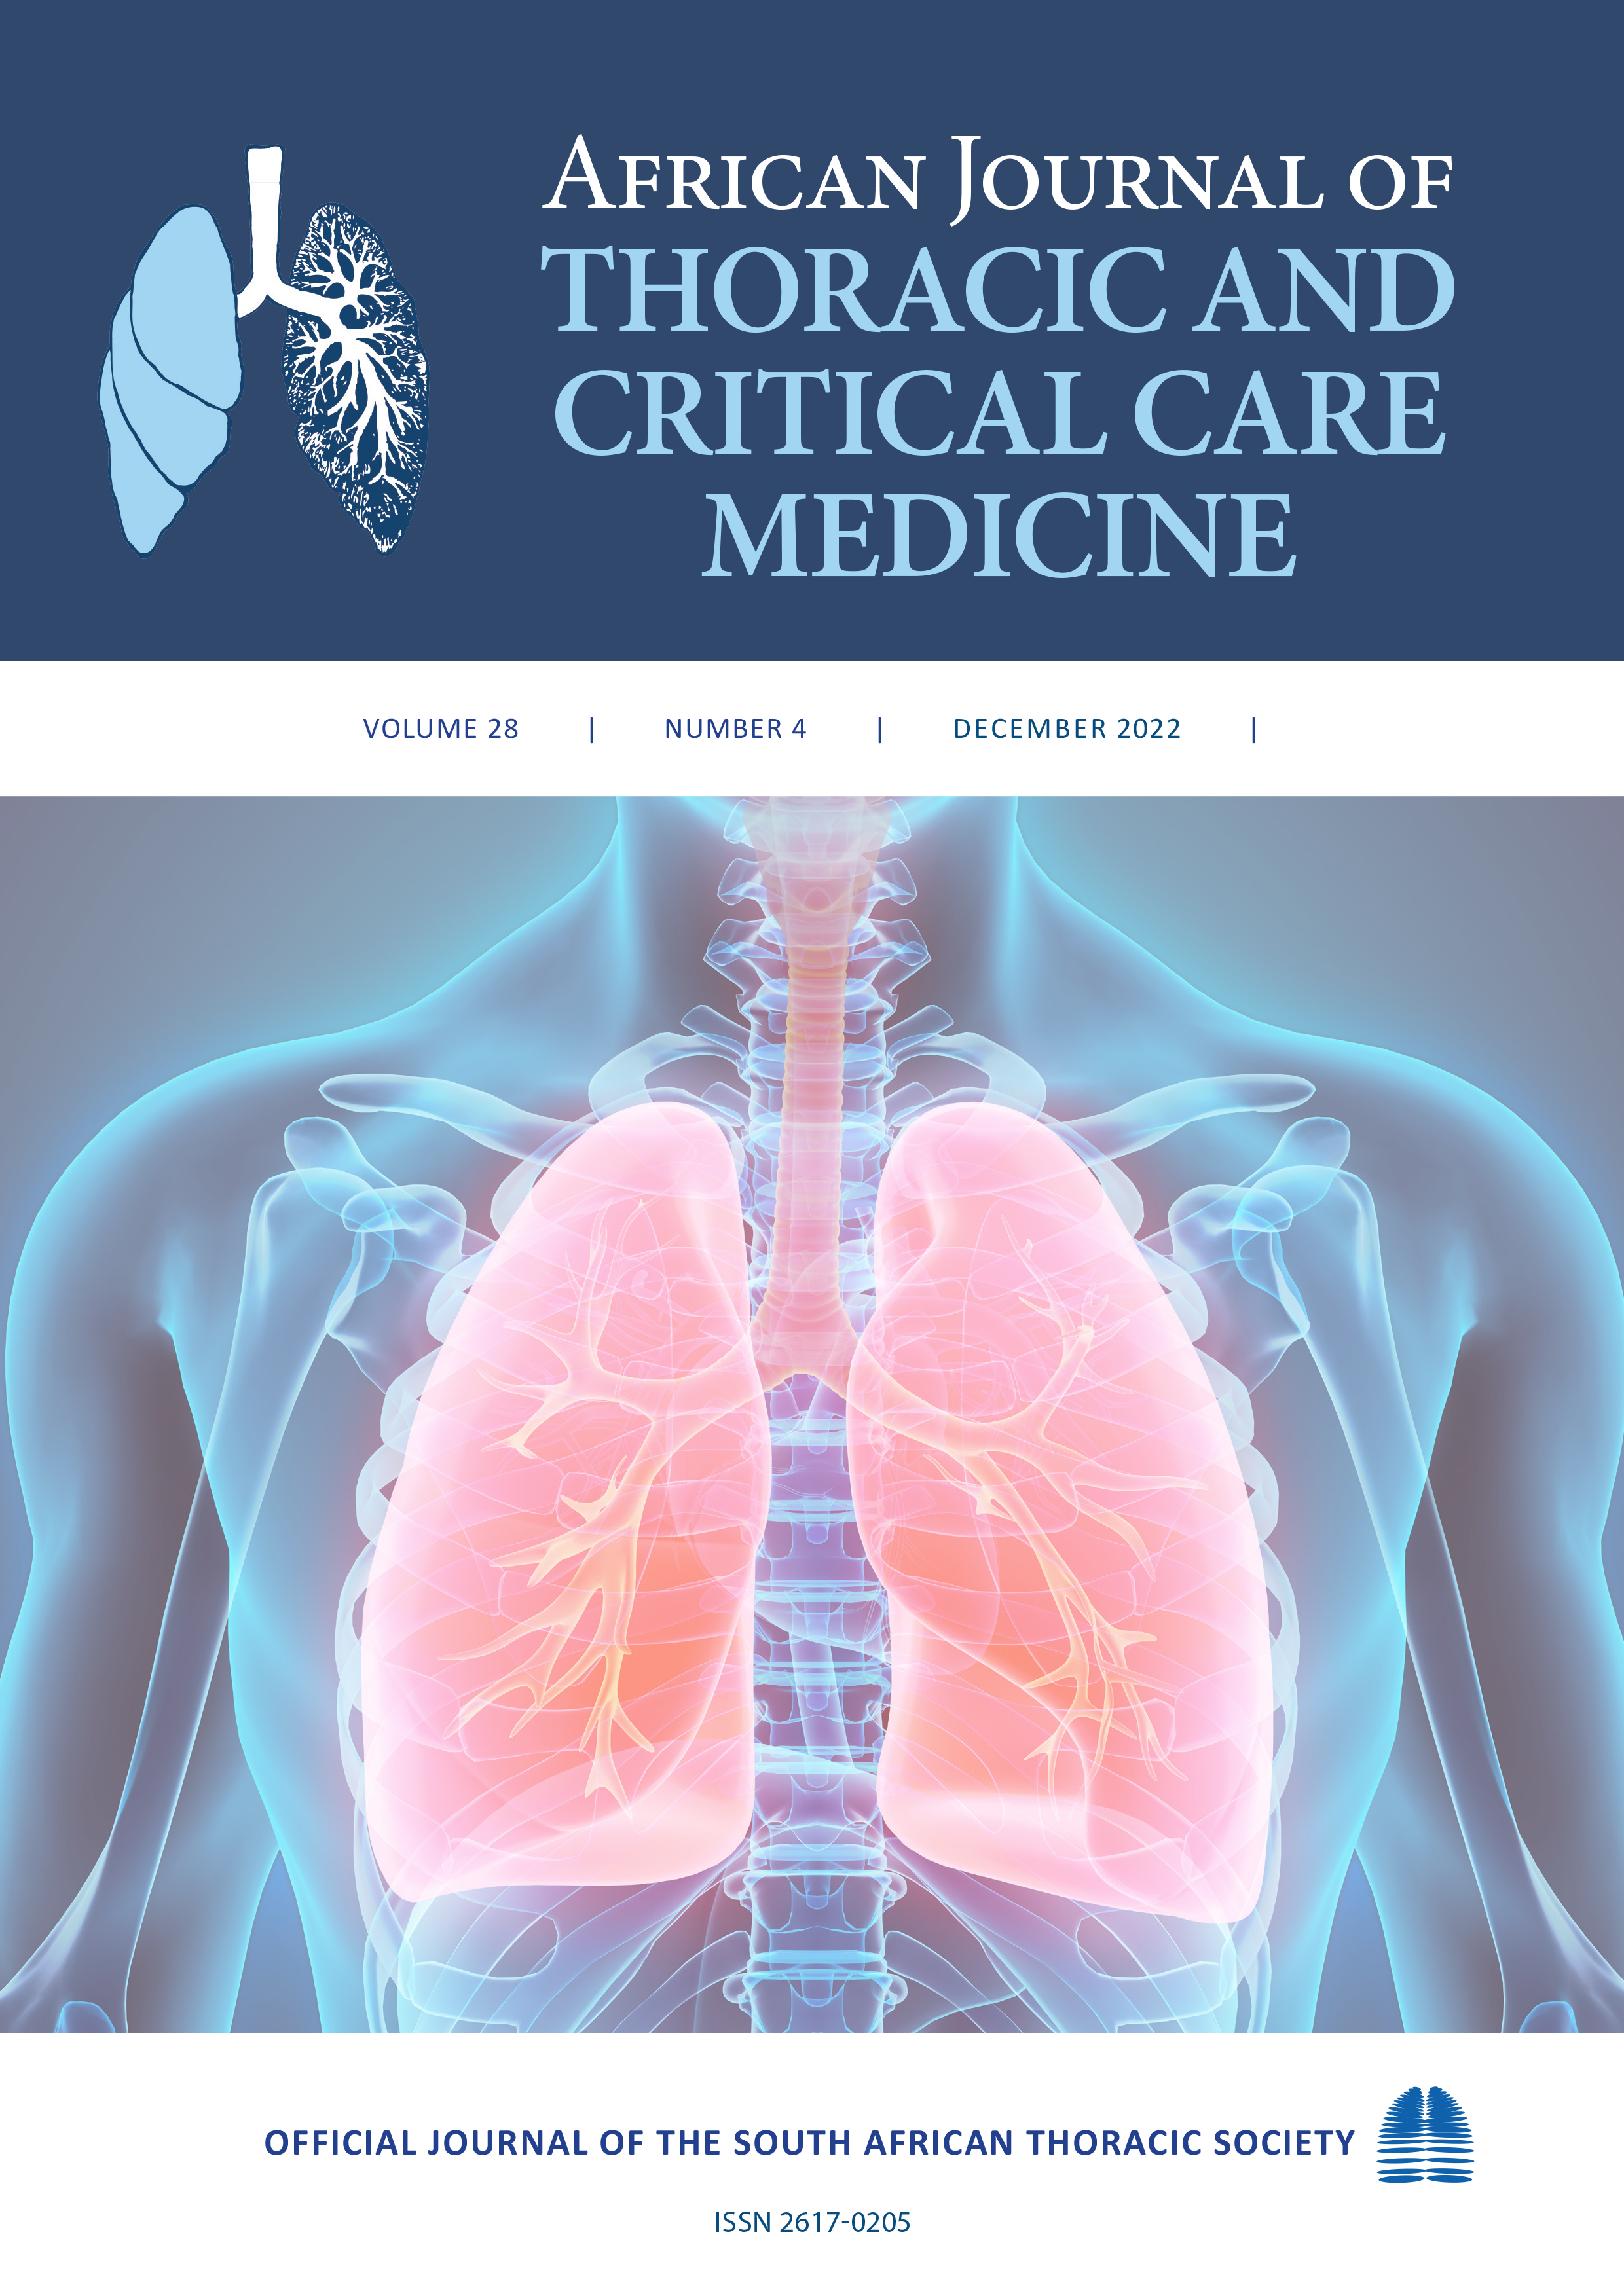 African Journal of Thoracic and Critical Care Medicine